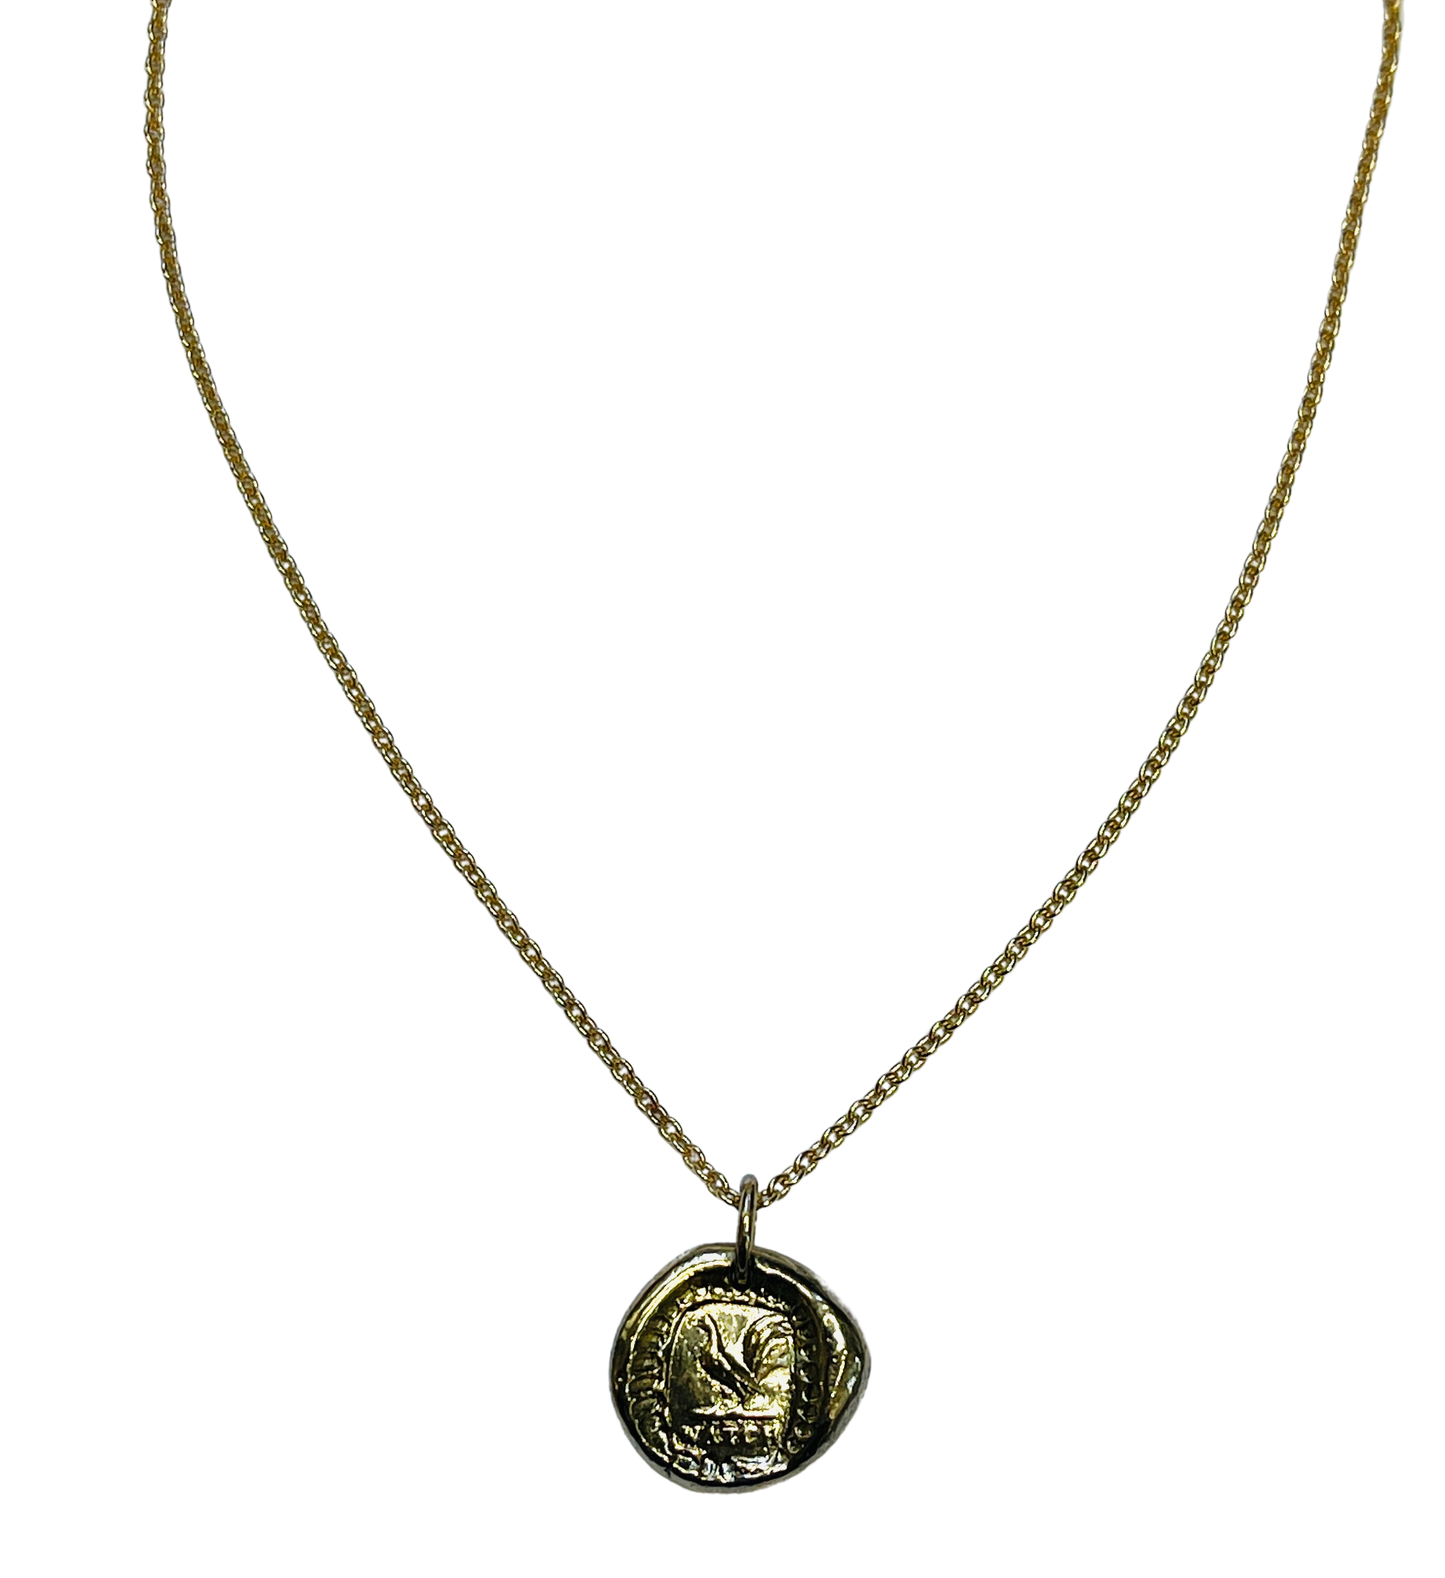 Vintage Rooster Wax Seal Pendant Necklace